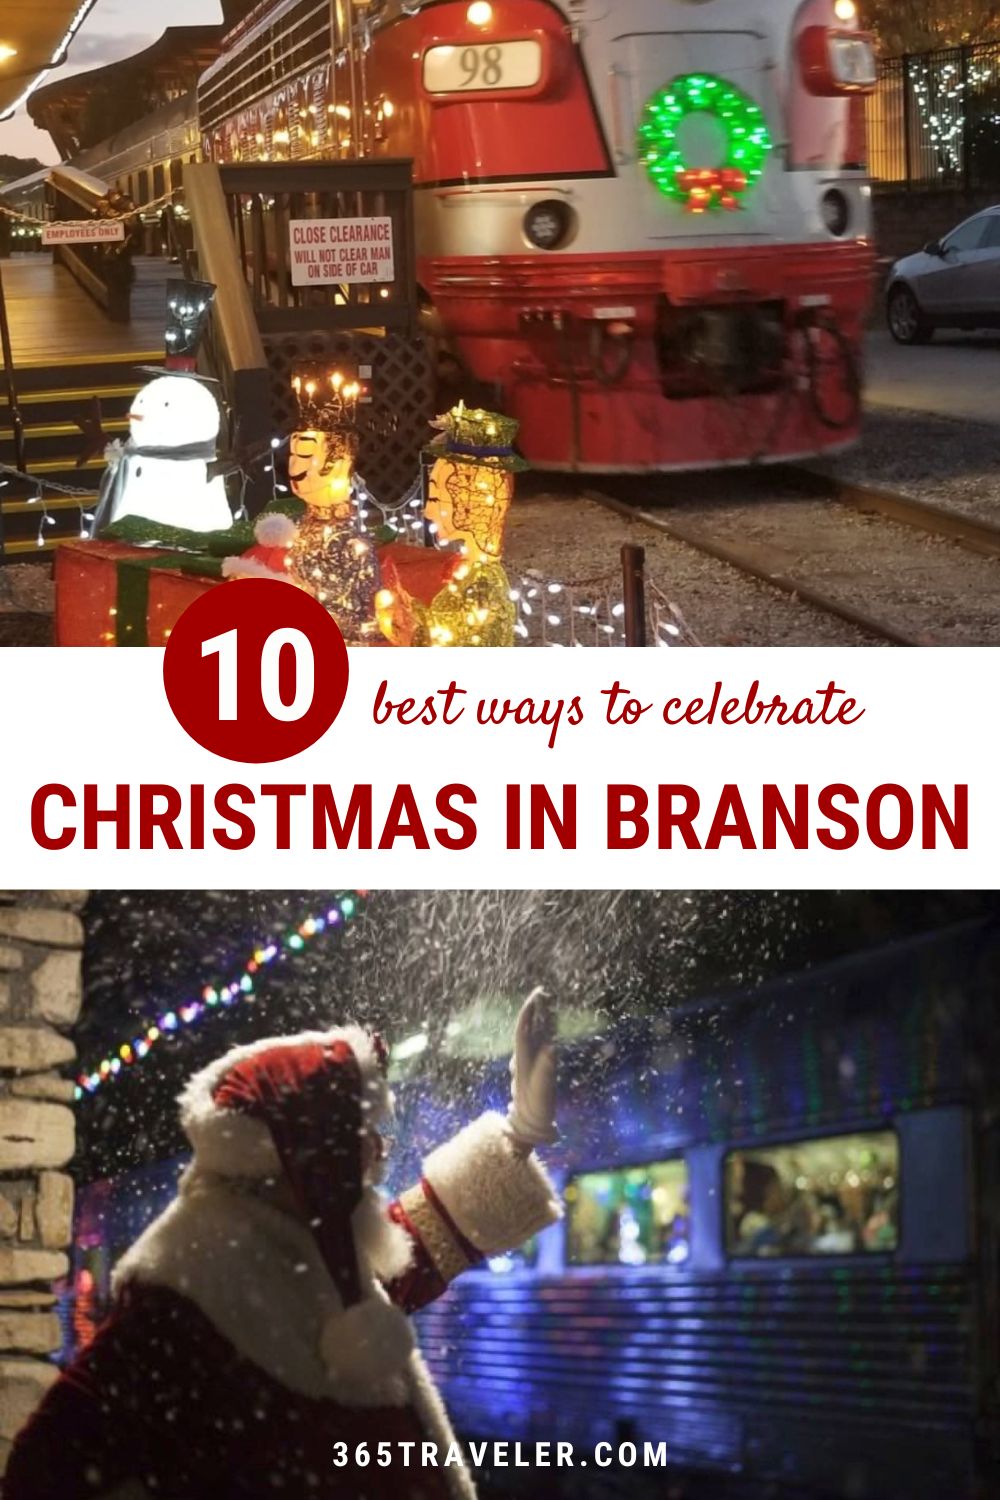 10 Great Ways To Partake in the Branson Christmas Magic